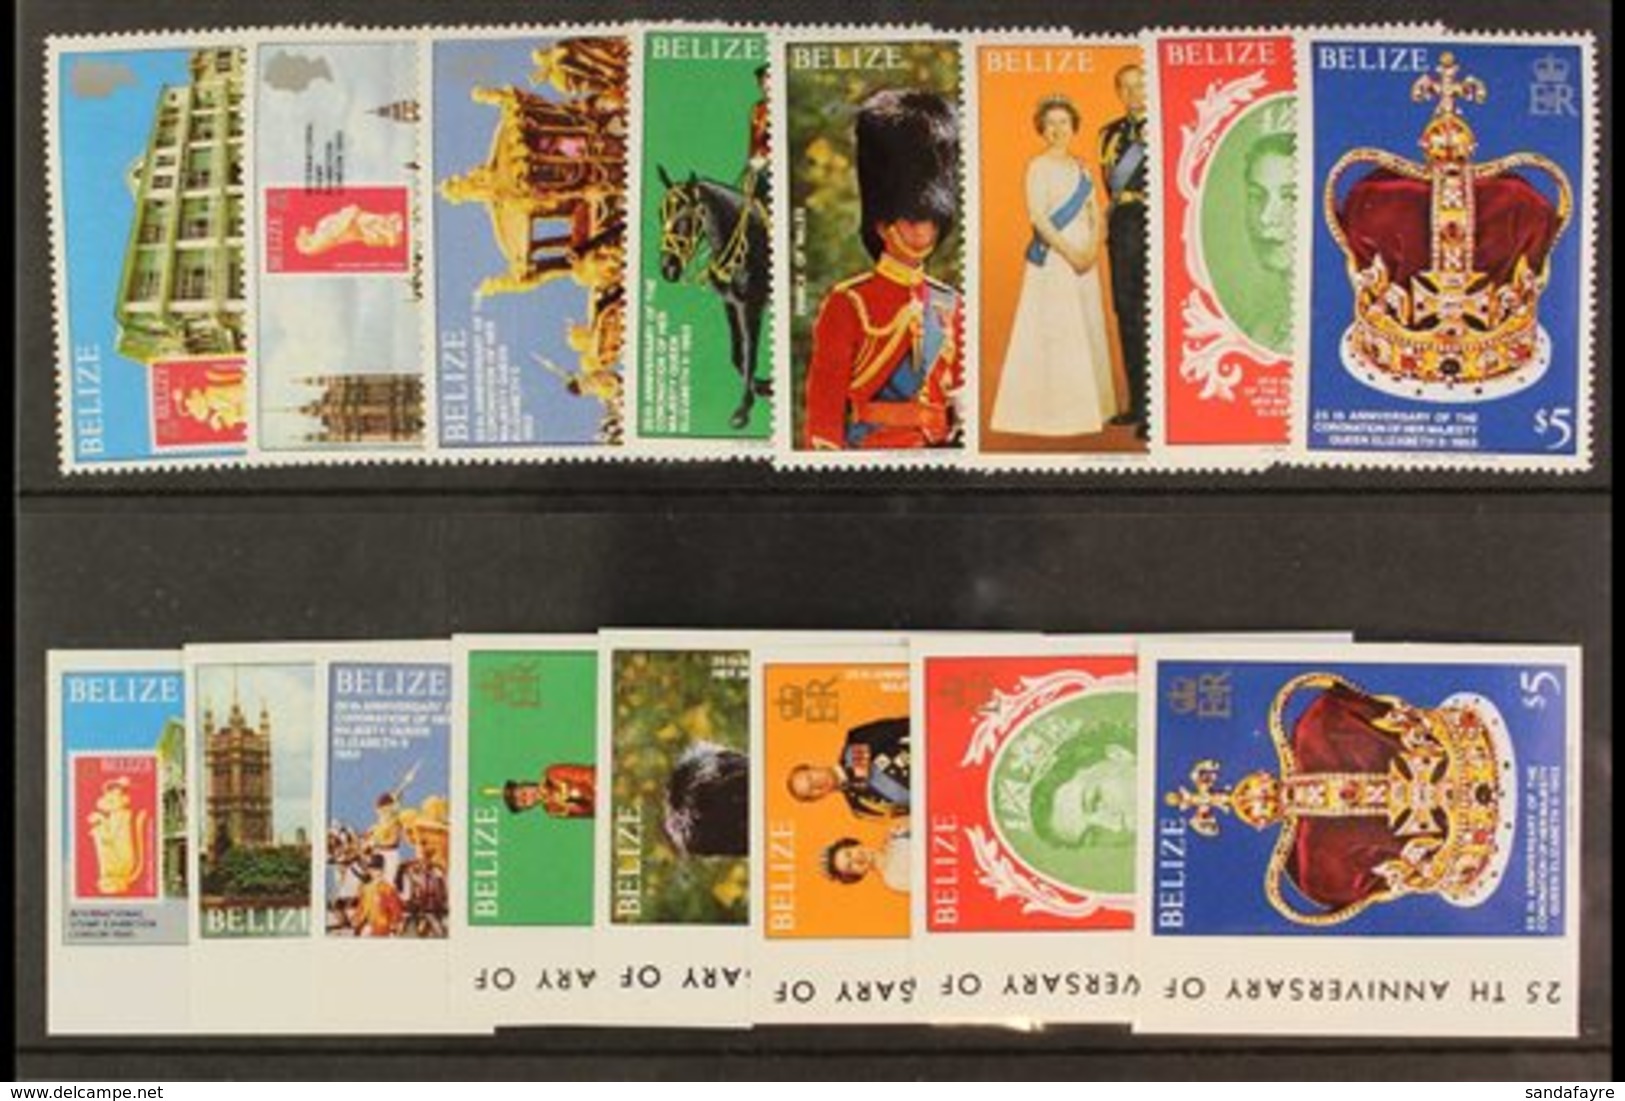 1979 Coronation 2nd Issue Complete Perf & Imperf Sets And Both Mini-sheets, SG 495/502 & MS503, Never Hinged Mint, Fresh - Belize (1973-...)